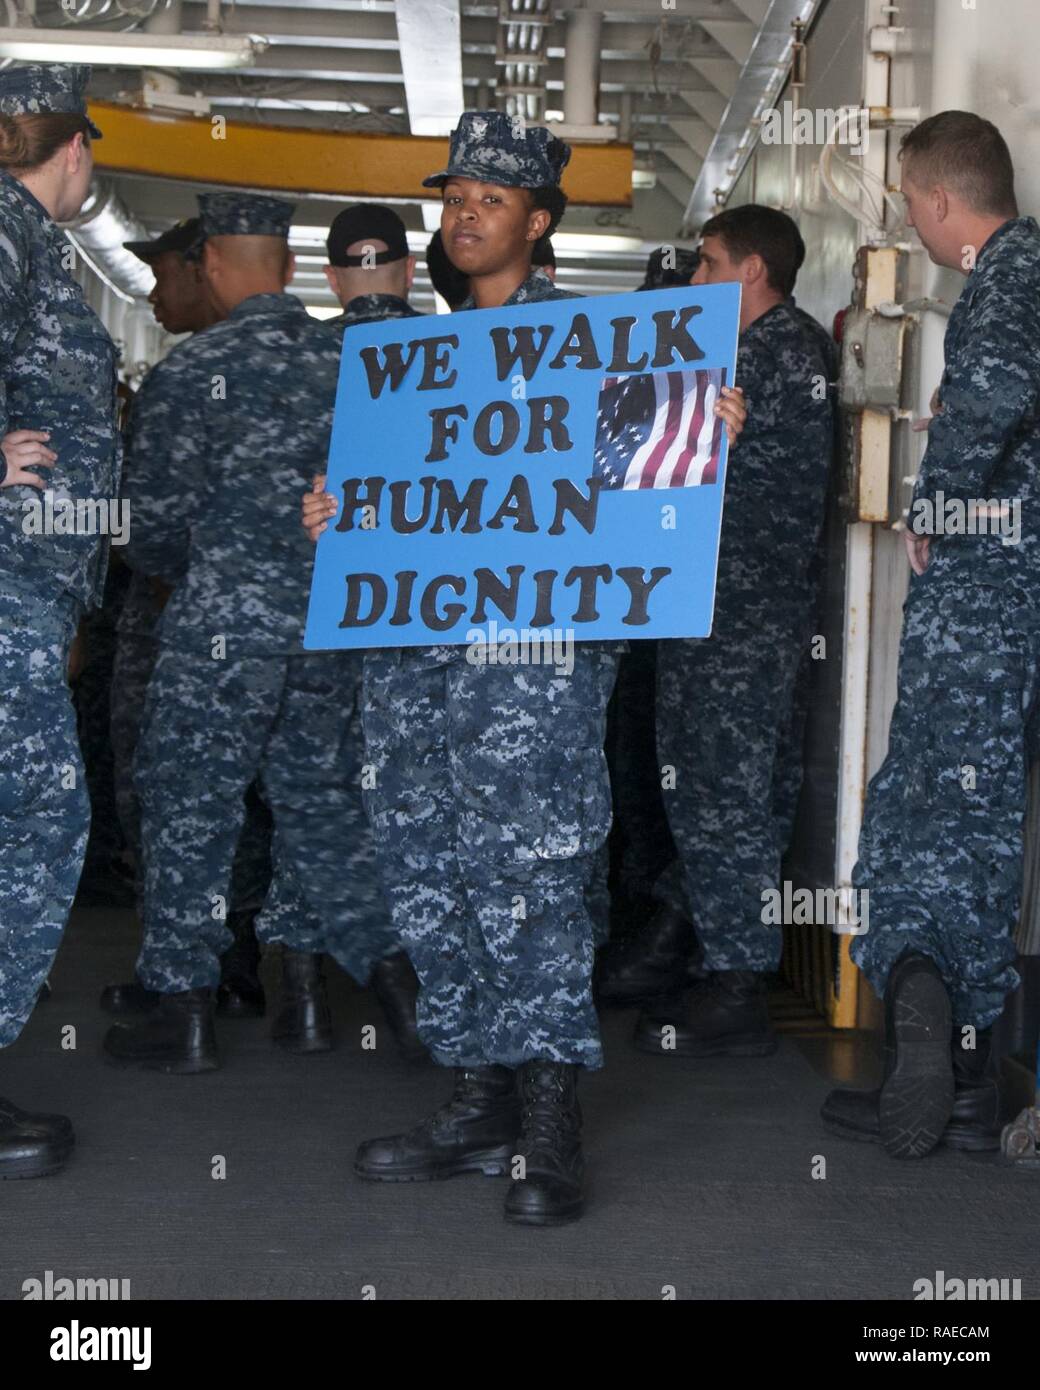 SANTA RITA, Guam (Jan. 31, 2017) Hospital Corpsman 3rd Class Sophie Karanja, a Sailor assigned to the submarine tender USS Frank Cable (AS 40), holds a sign before beginning a march honoring Dr. Martin Luther King Jr. aboard the ship, January 31. The ship’s diversity committee held the event to reenact the1965 Selma-to-Montgomery March for voting rights led by Martin Luther King Jr.’s Southern Christian Leadership Conference. Stock Photo